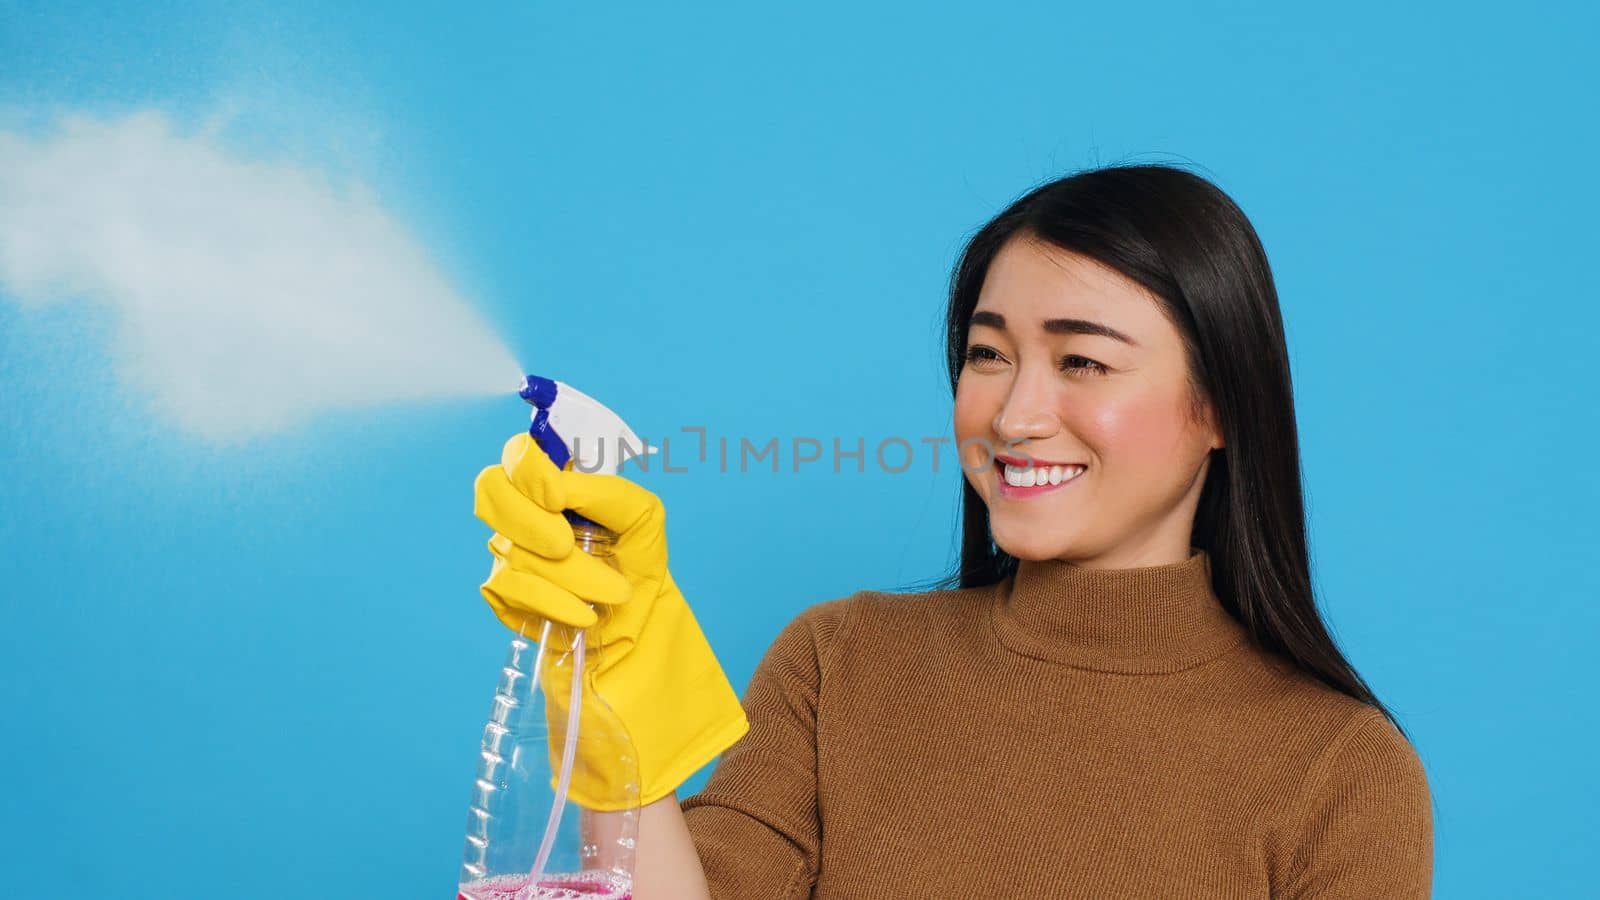 Housekeeper wearing yellow rubber gloves while holding spray and duster during houseclean, standing over blue background. Housewife primary responsibilities is to maintain cleanliness and hygiene